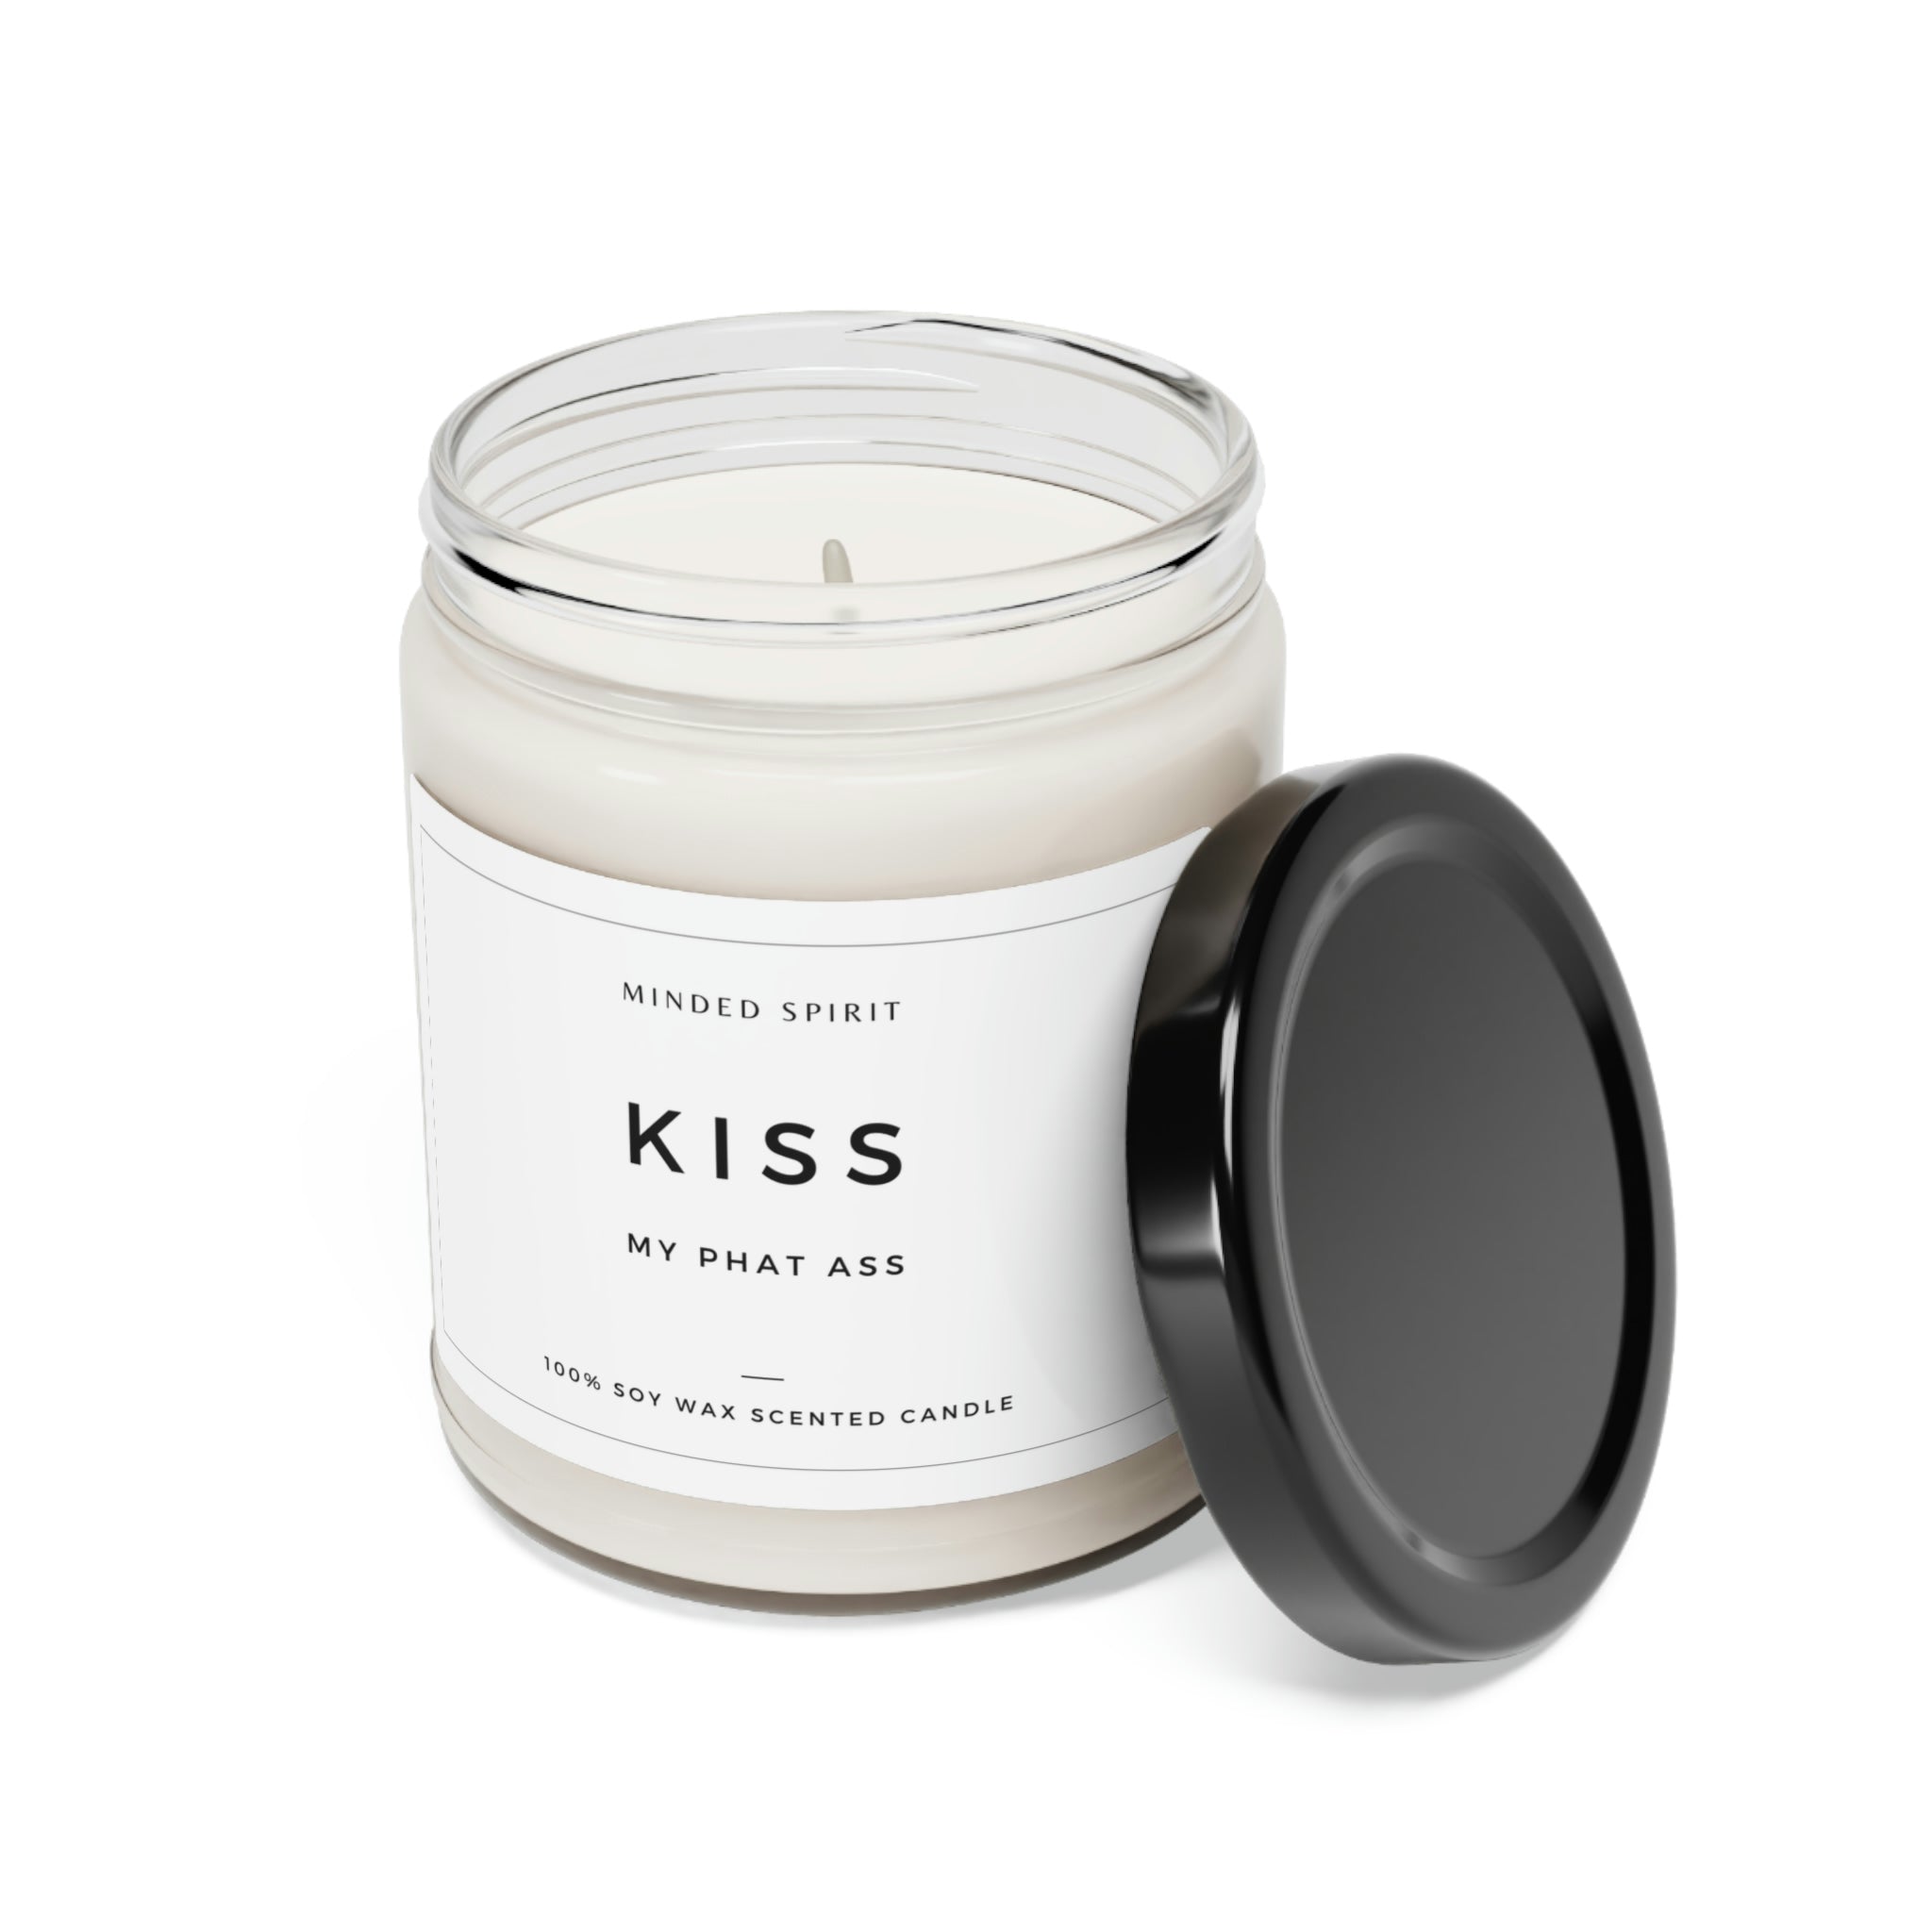 Kiss Sassy Self-Help Scented Candle